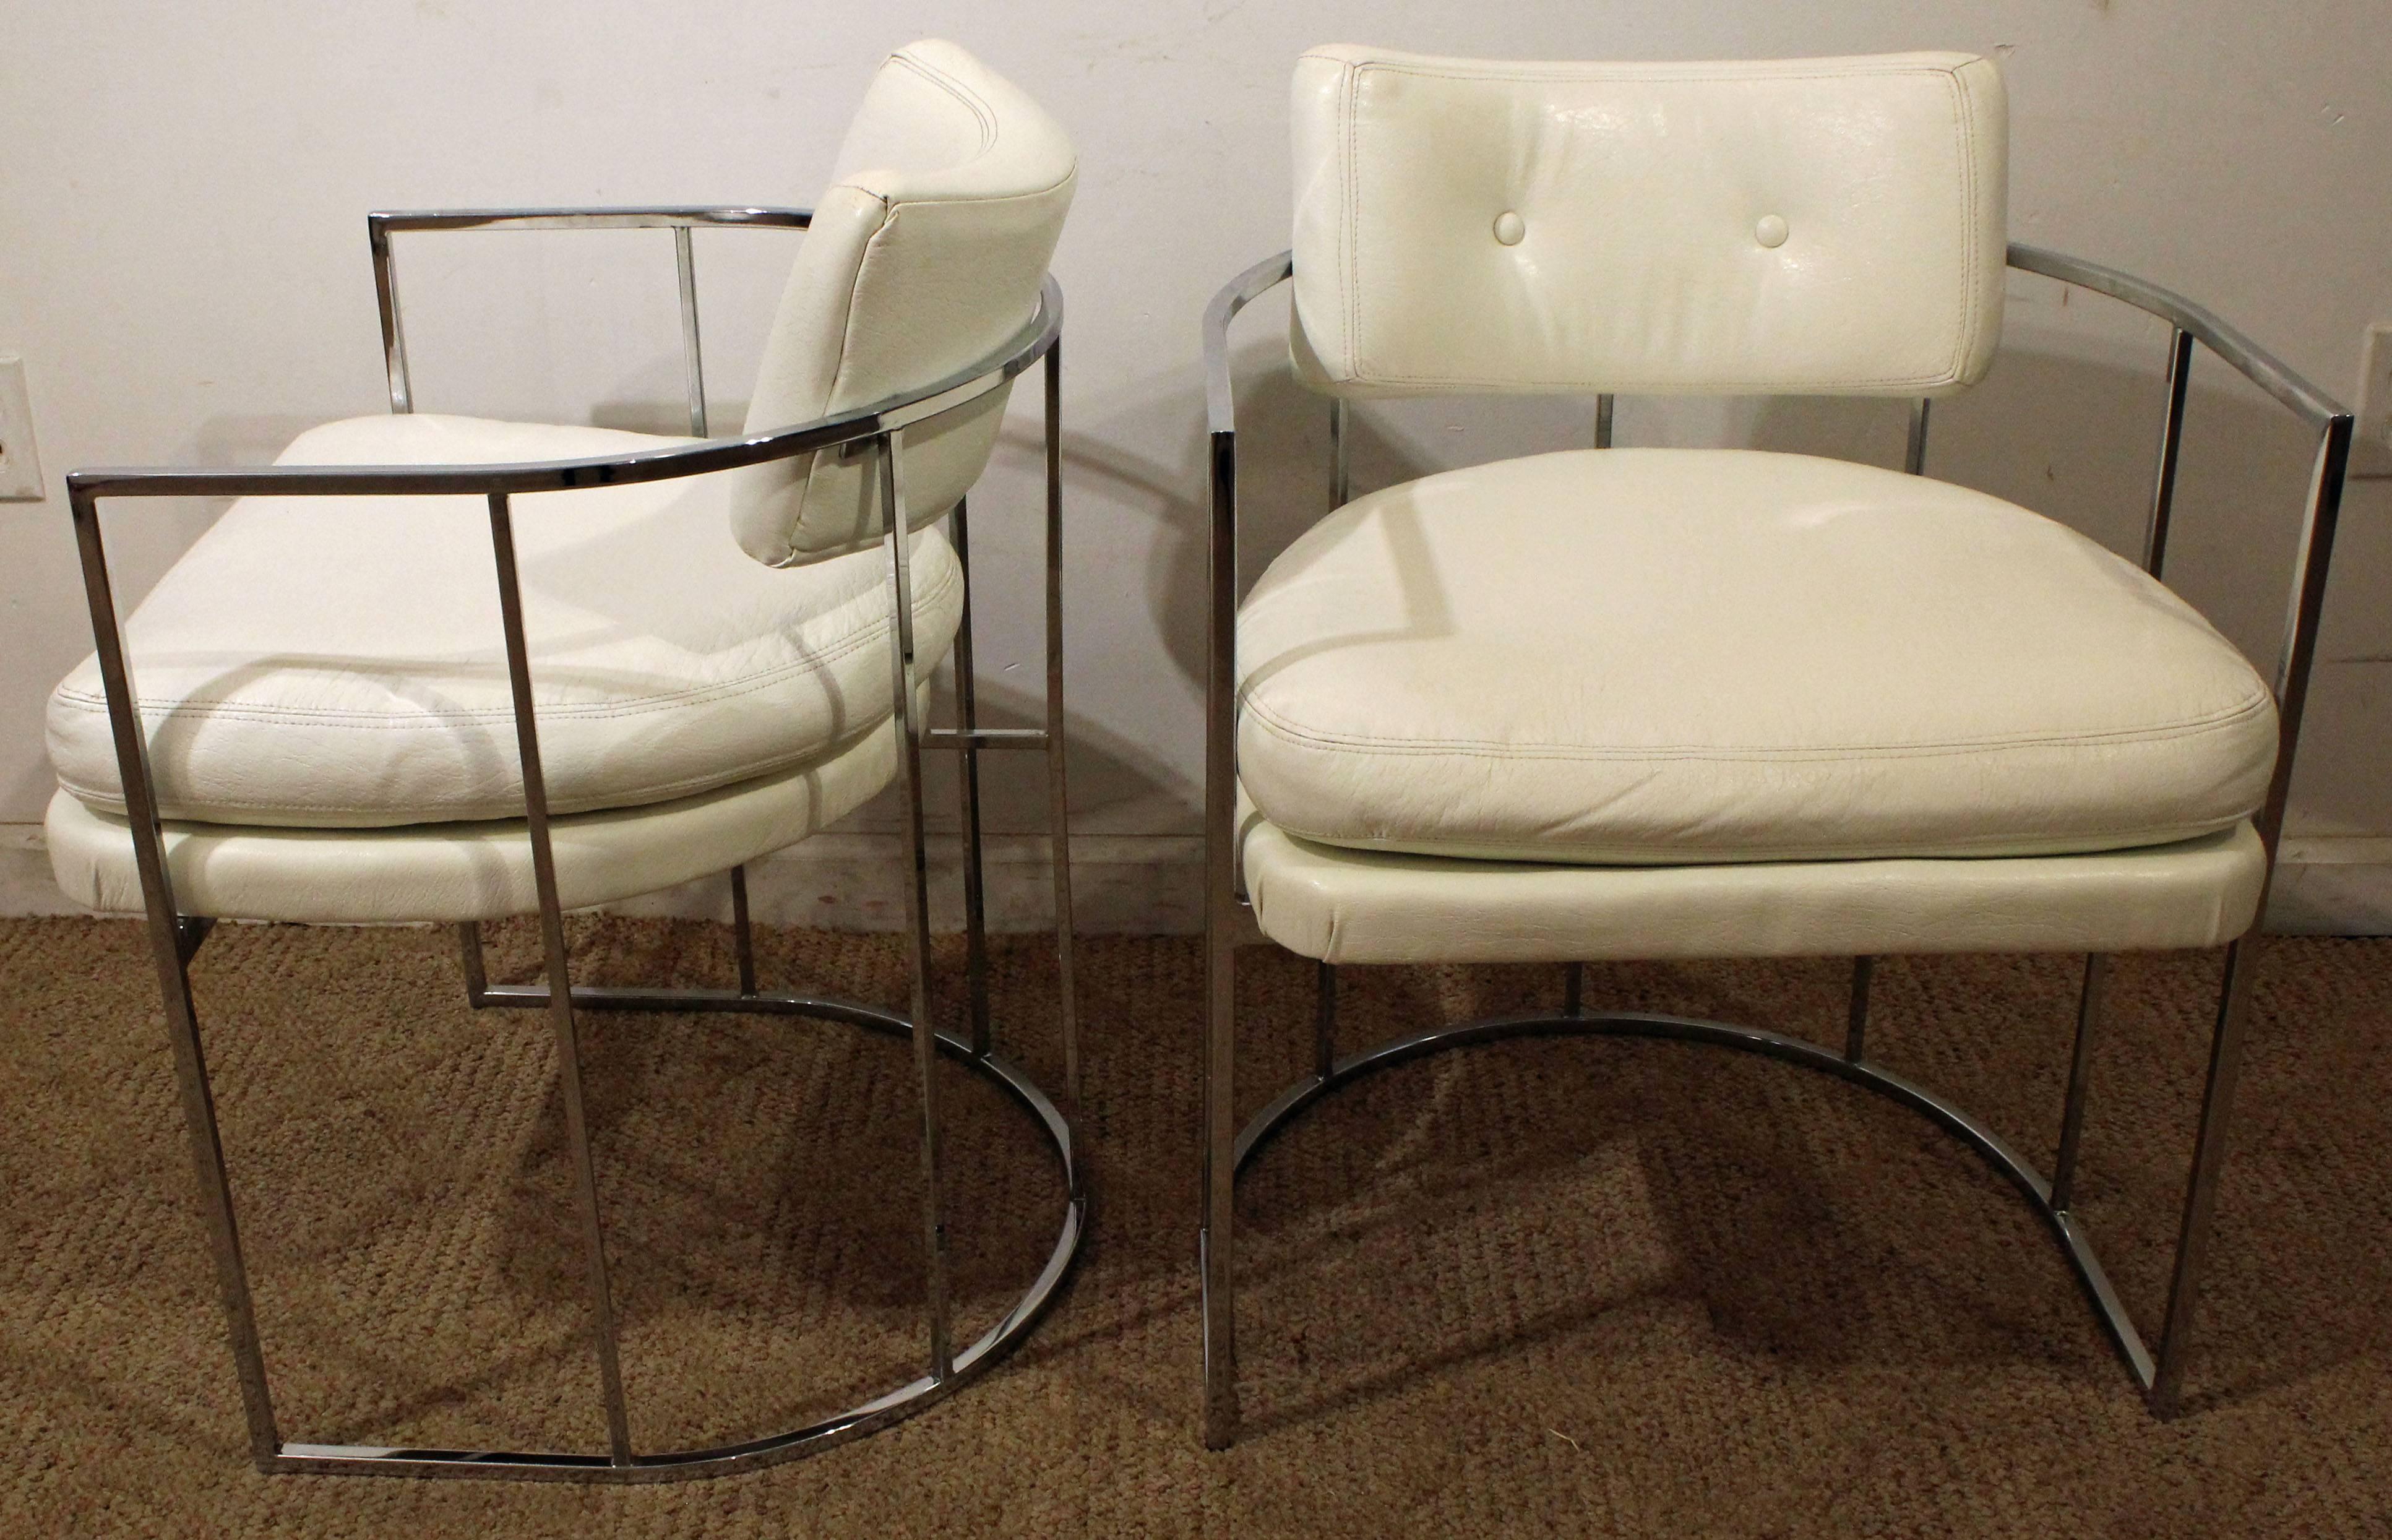 These chairs feature white vinyl upholstery and barrel-back chrome bases. They are signed by Thayer Coggin.

Measure: 22